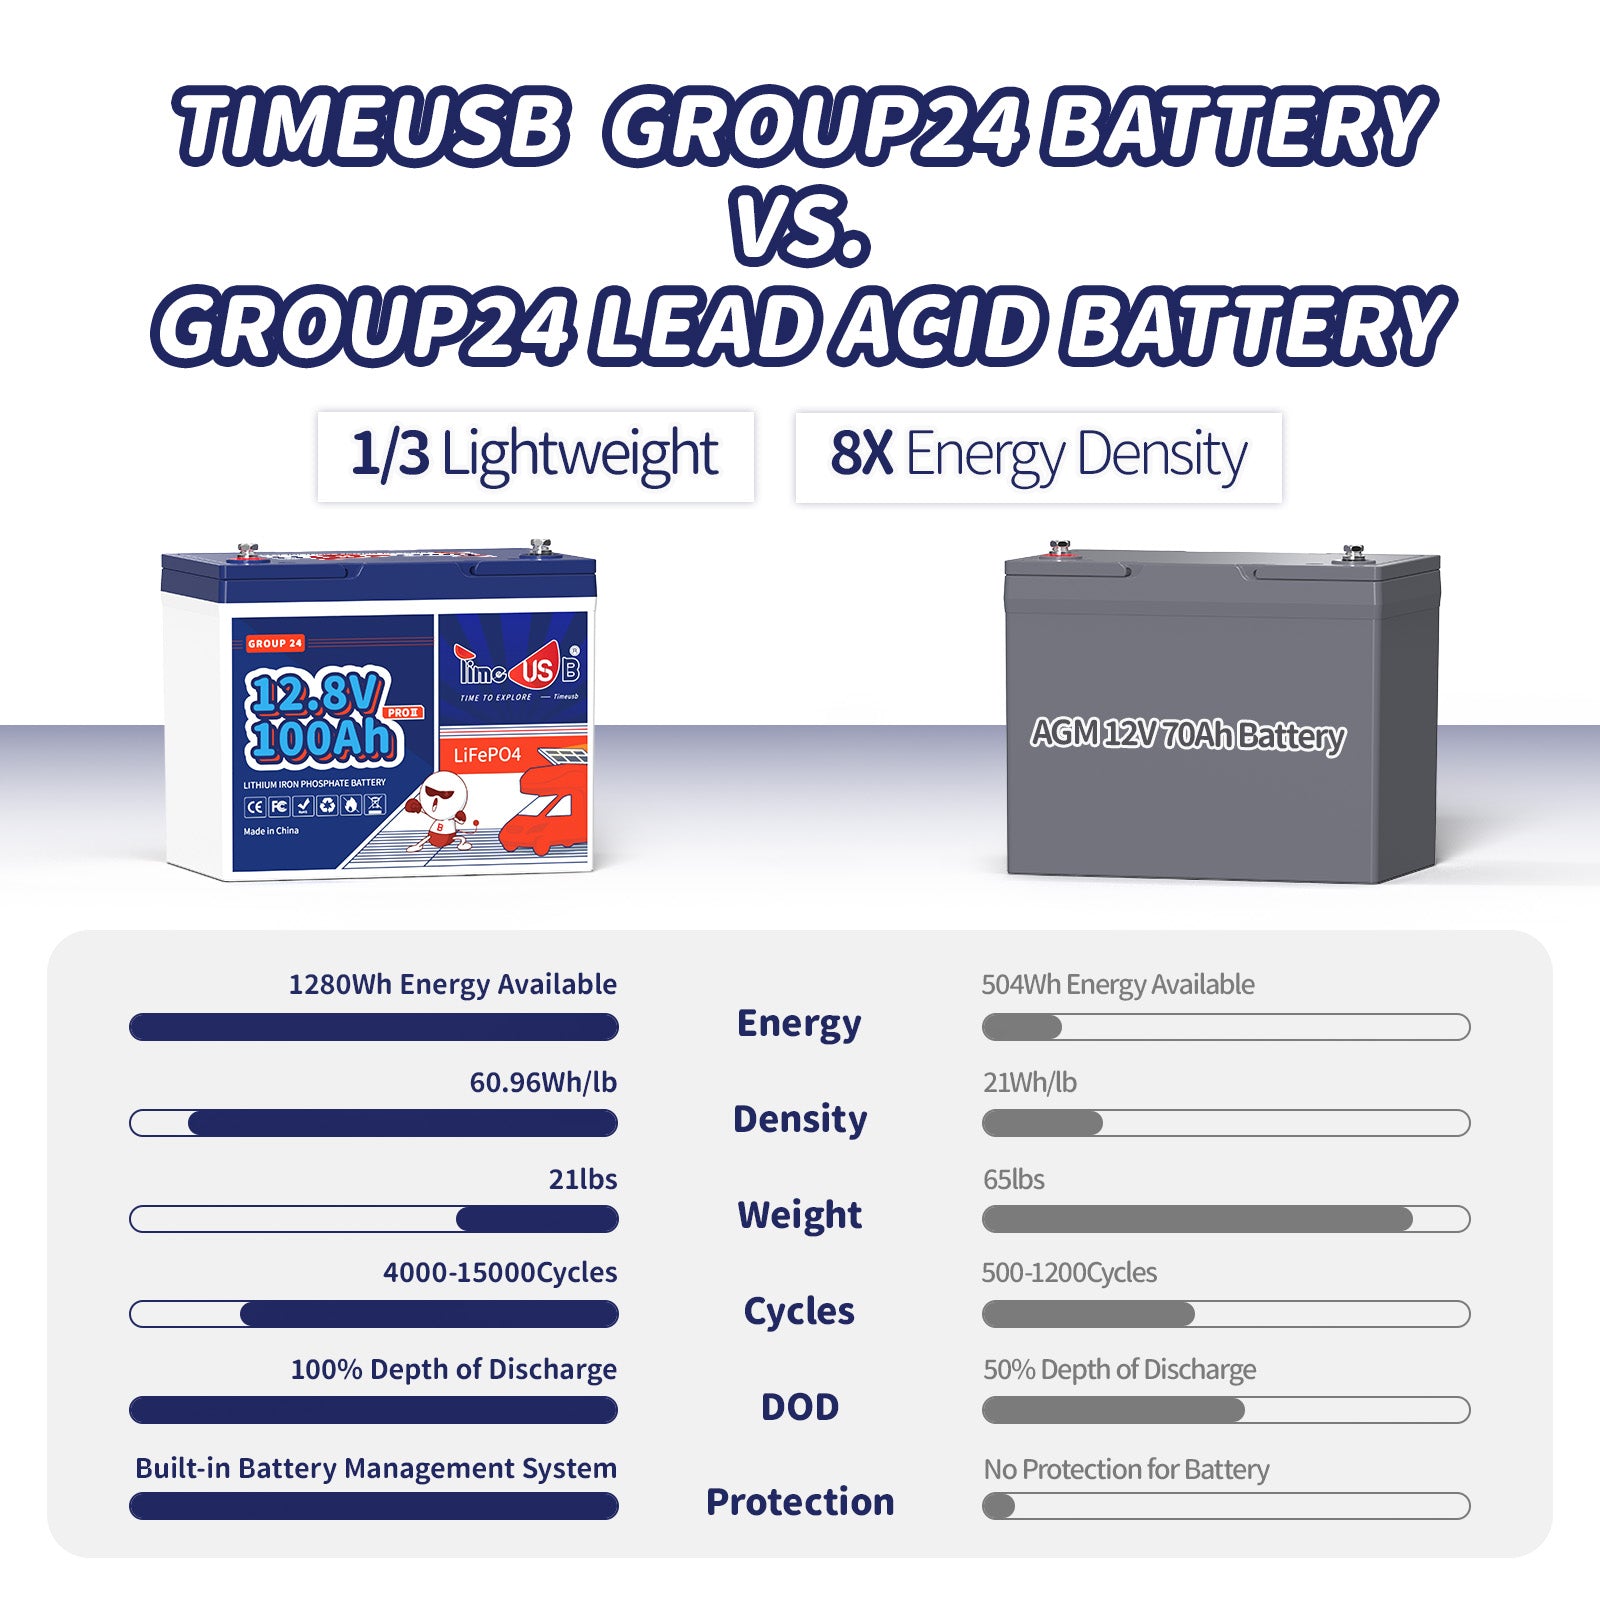 Timeusb 12V 100Ah Group24 size LiFePO4 Battery, 1280Wh & 100A BMS